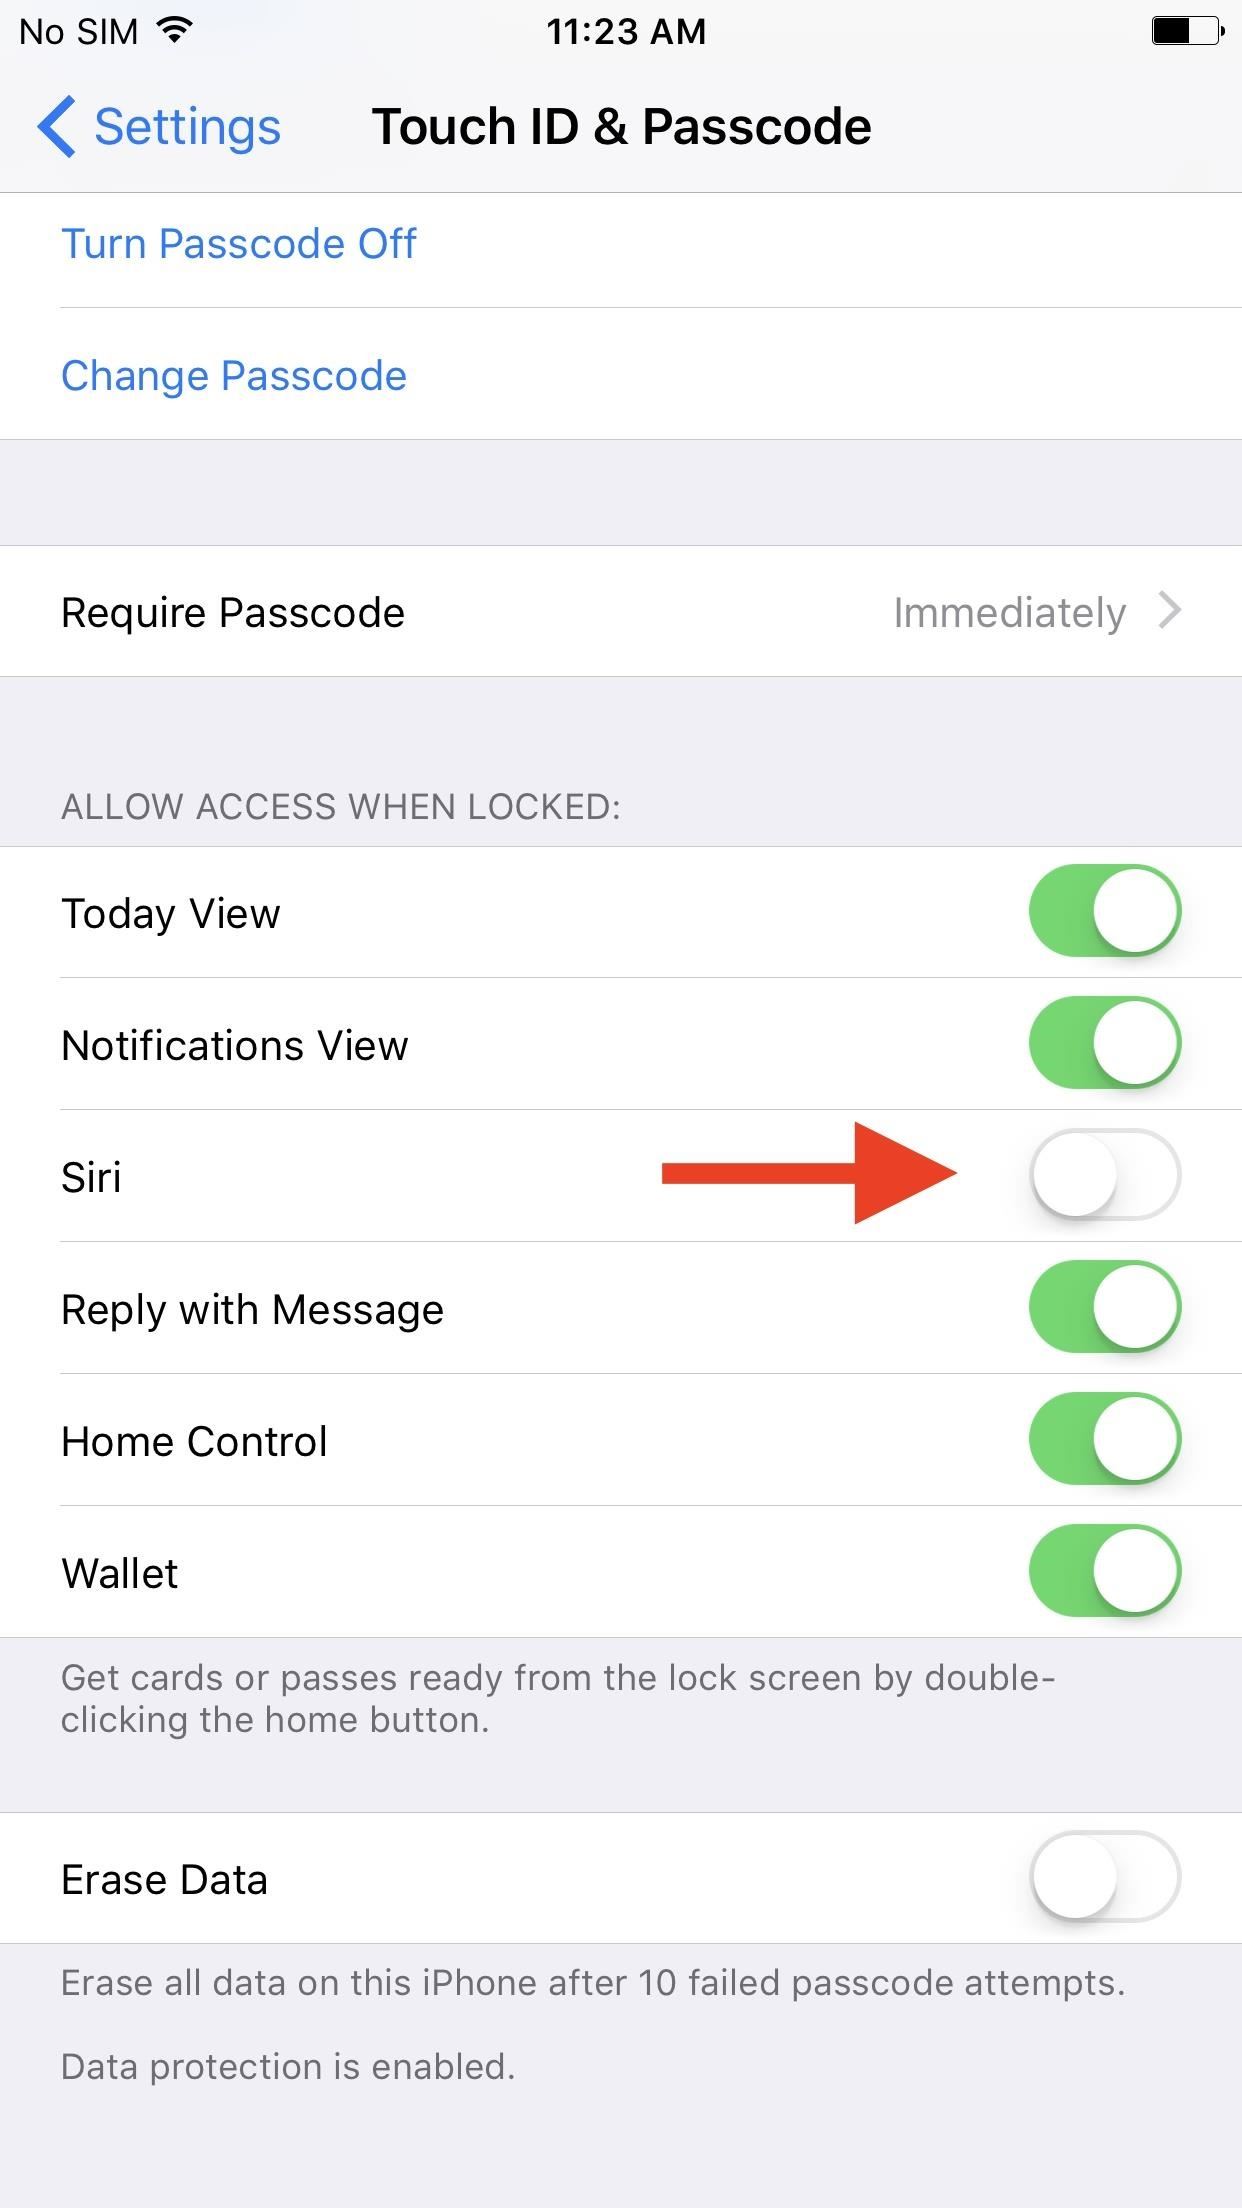 Disable Siri on the lock screen: Prevent unauthorized access to your iPhone by disabling Siri when your device is locked.
Enable Two-Factor Authentication: Add an extra level of security by requiring a verification code in addition to your passcode to access your Apple ID and iCloud.